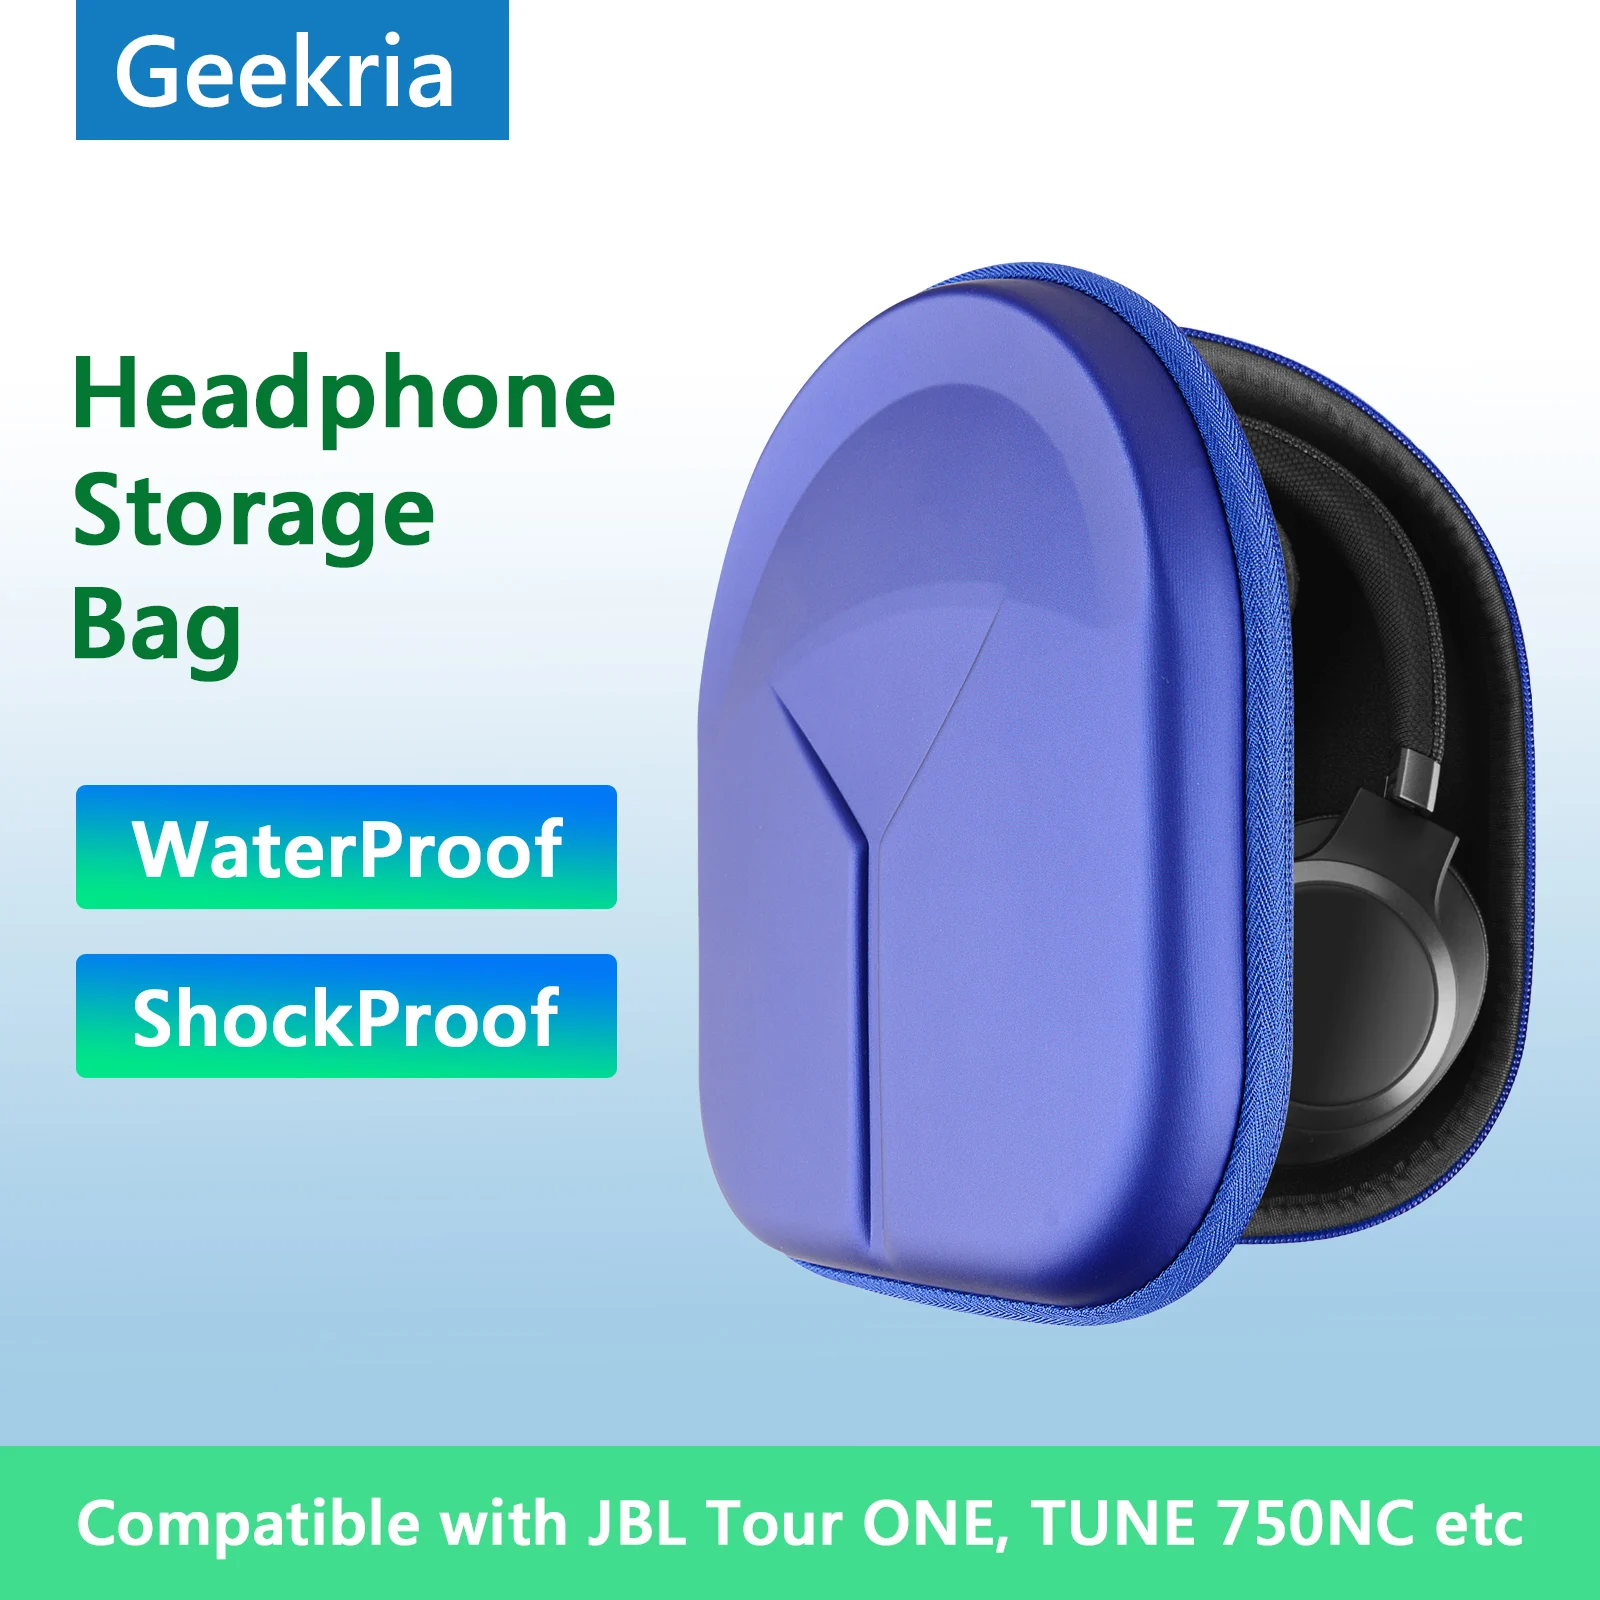 Geekria Headphones Case For JBL Tour ONE, Tune 750NC, Hard Portable Bluetooth Earphones Headset Bag For Accessories Storage enlarge